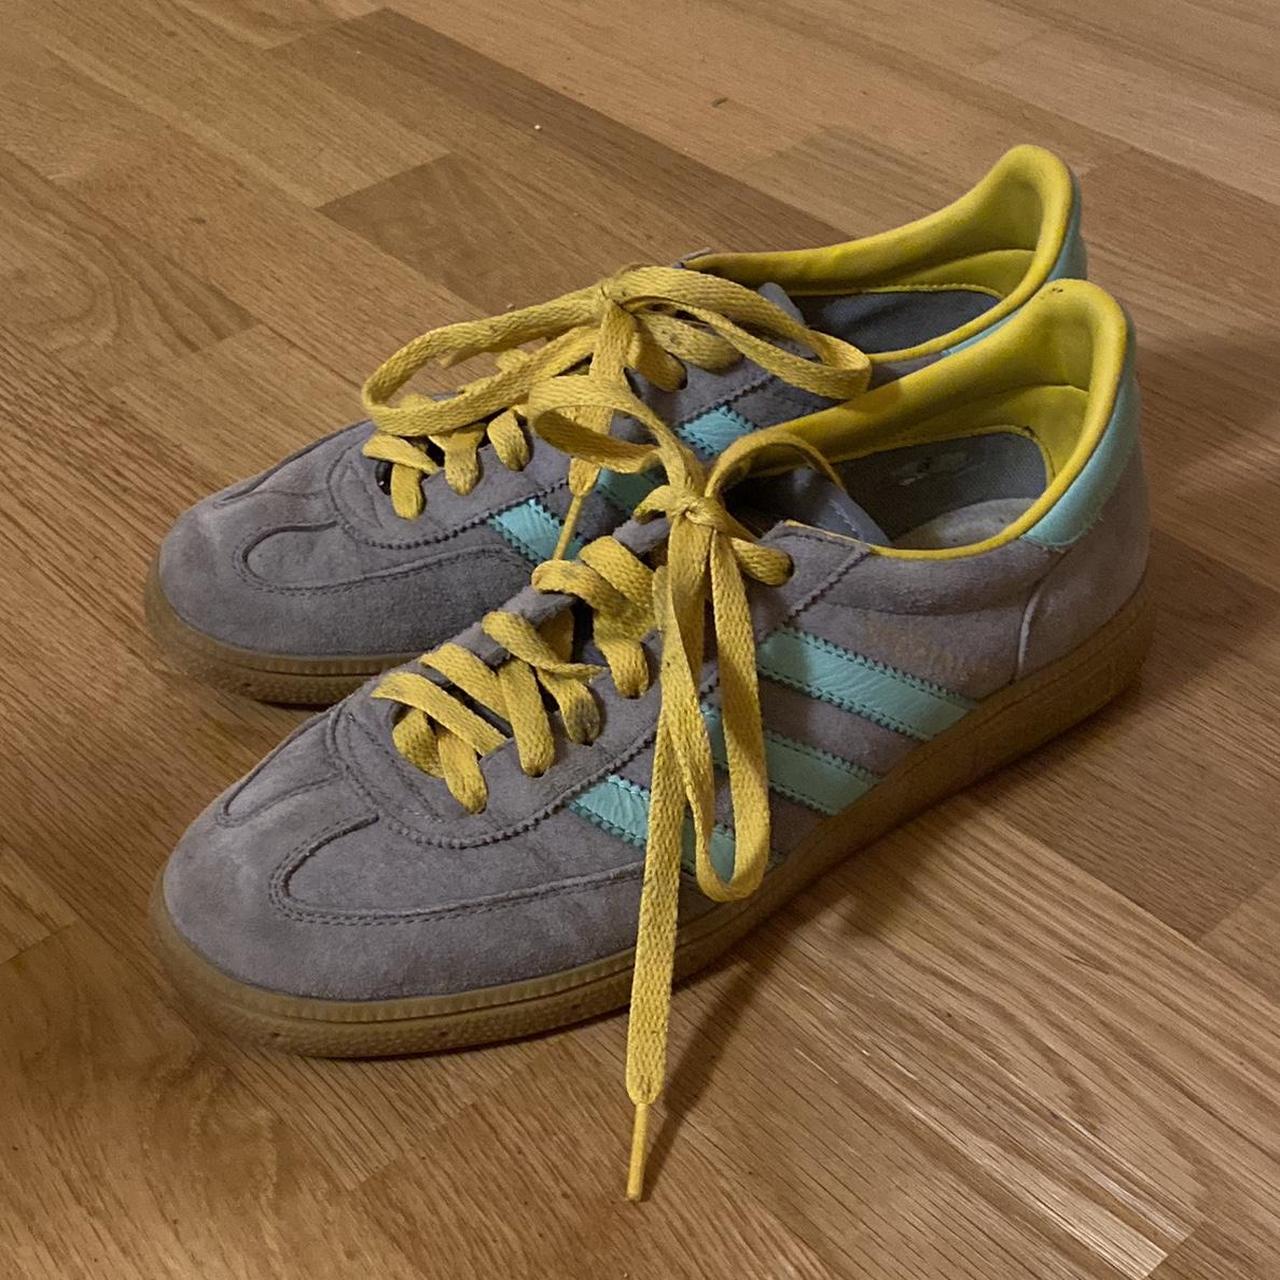 Adidas Spezial gray suede shoes with turquoise and... - Depop